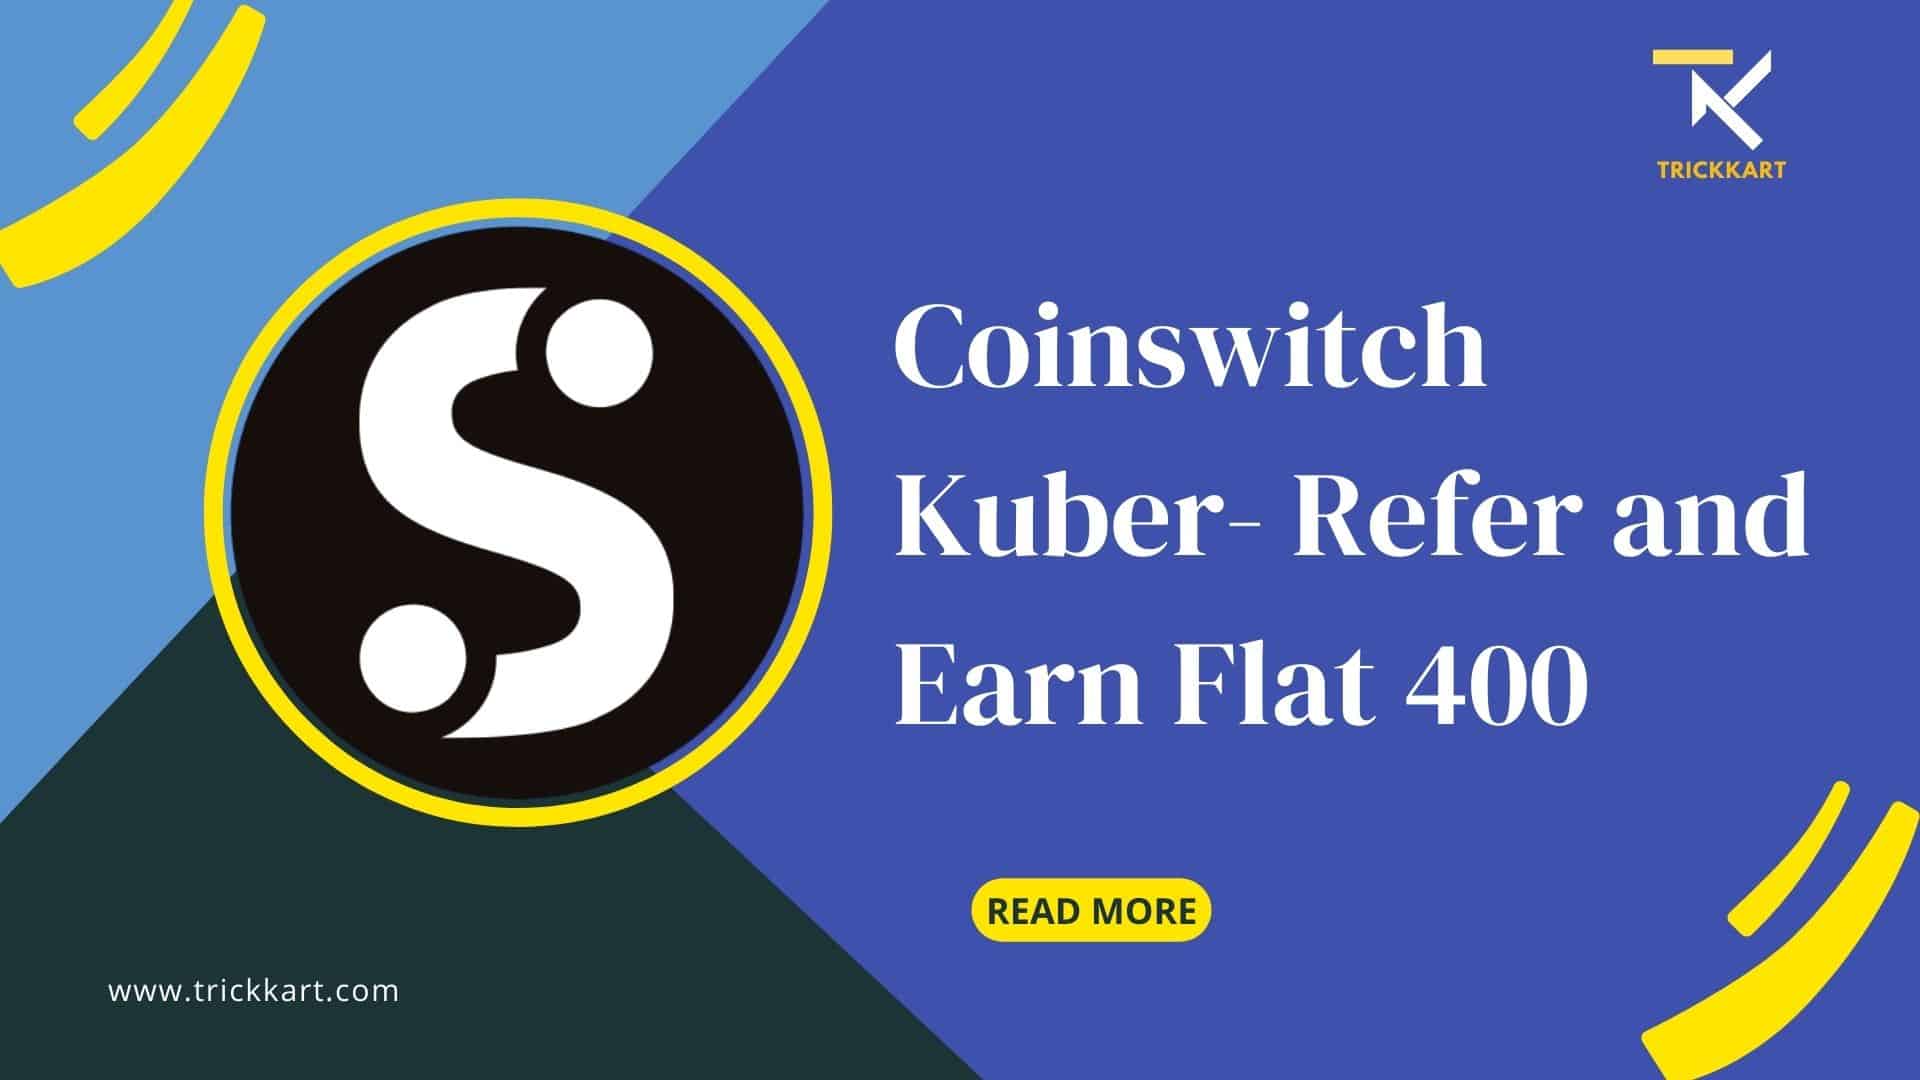 Coinswitch Kuber App New Crypto Refer And Earn Offer